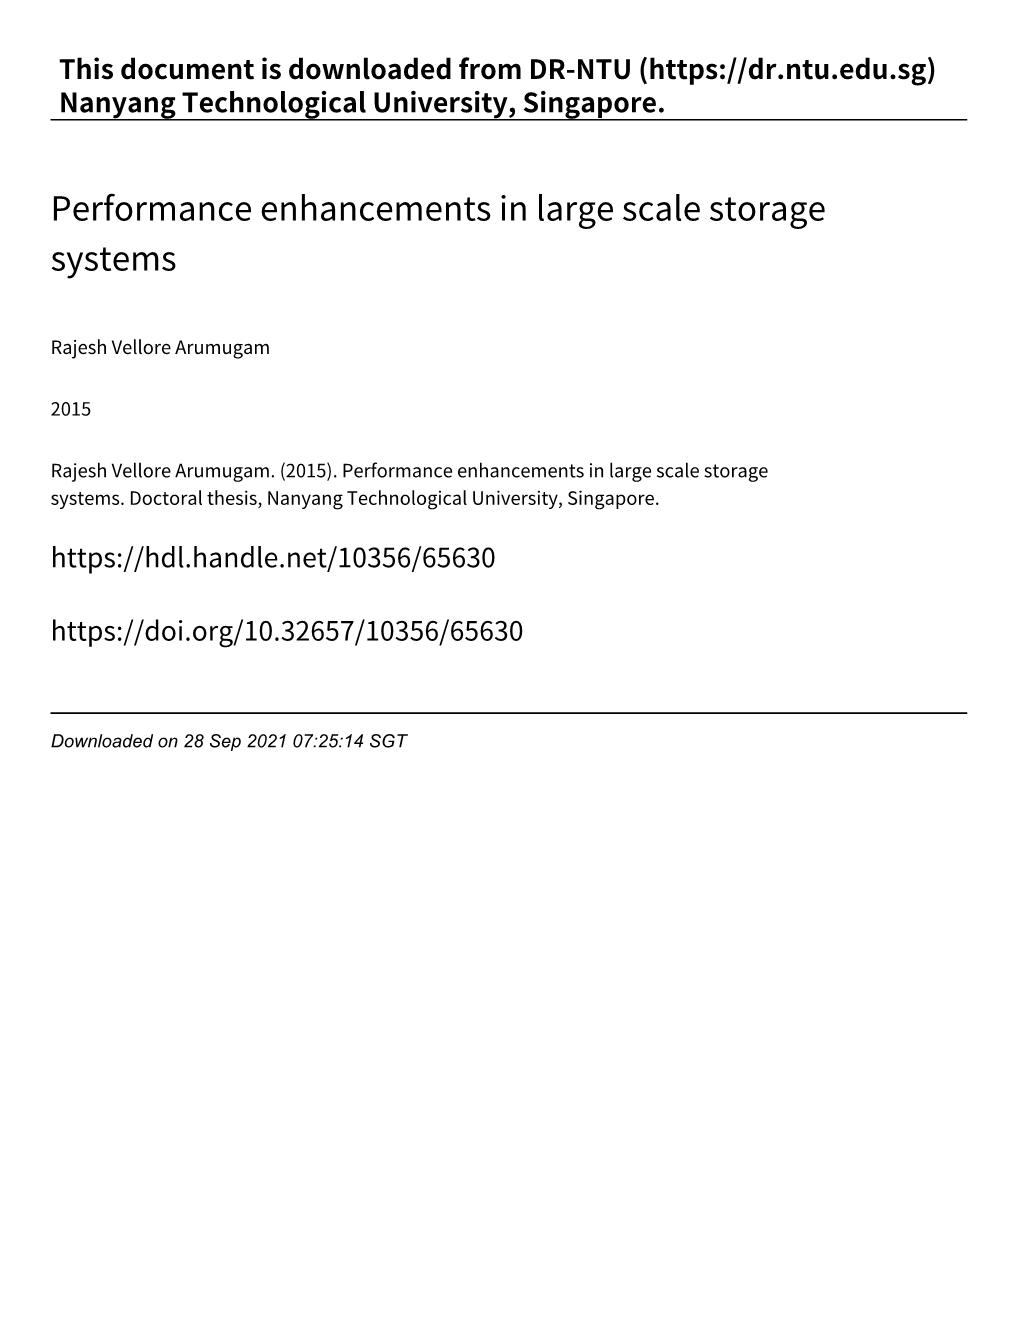 Performance Enhancements in Large Scale Storage Systems